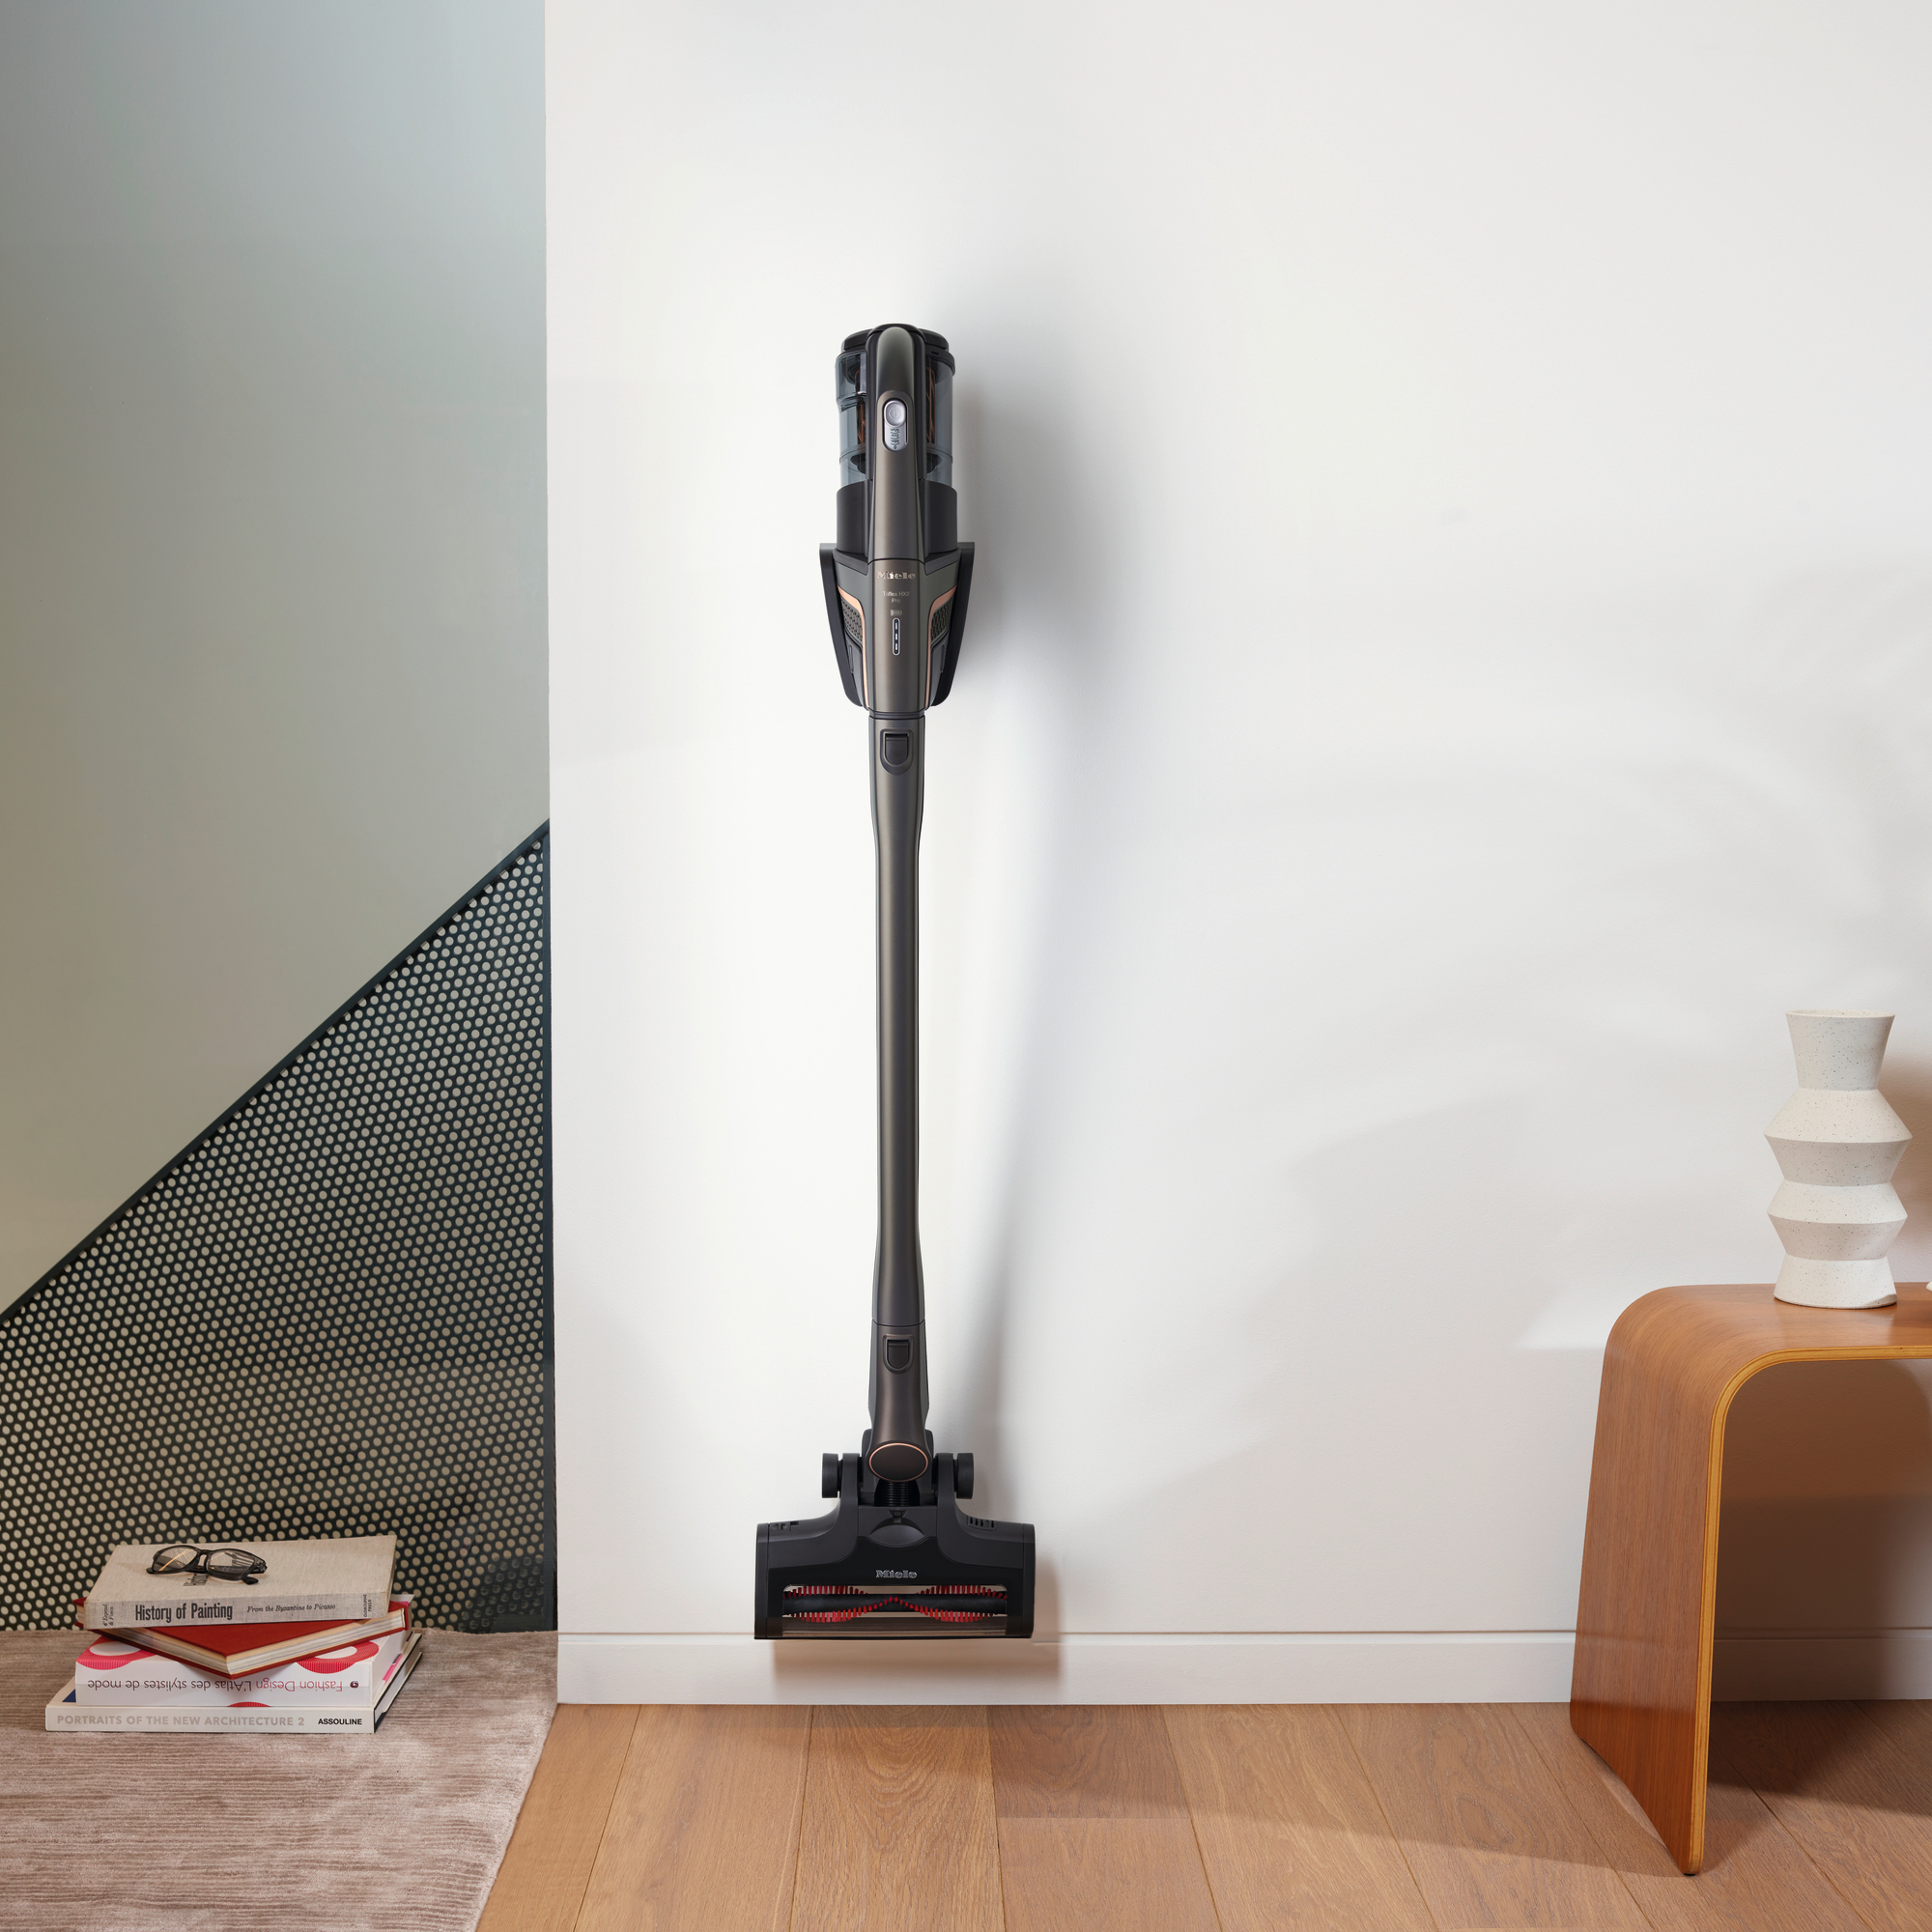 3-in-1, compact, or robot - which vacuum cleaner are you?